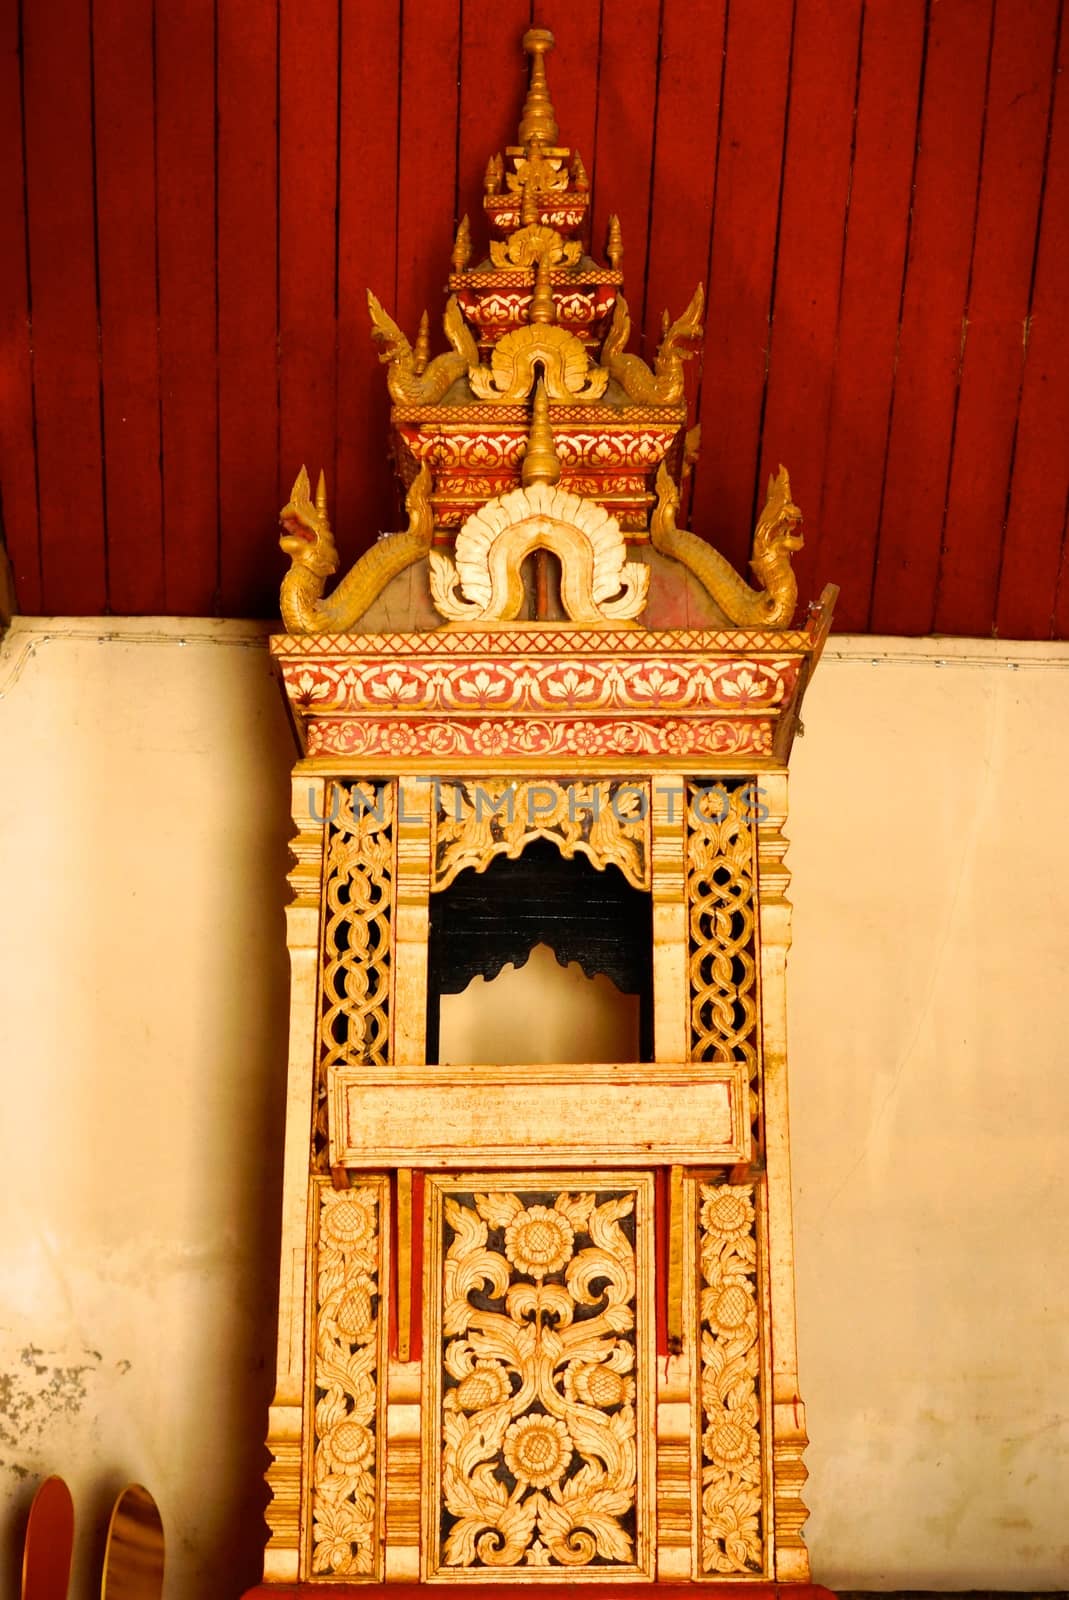 the detail of ancient thai decorated pattern that include handcraft wood carving work,gold painting and decorated with gold plate,mirror and precious stone,Lampang temple,Thailand